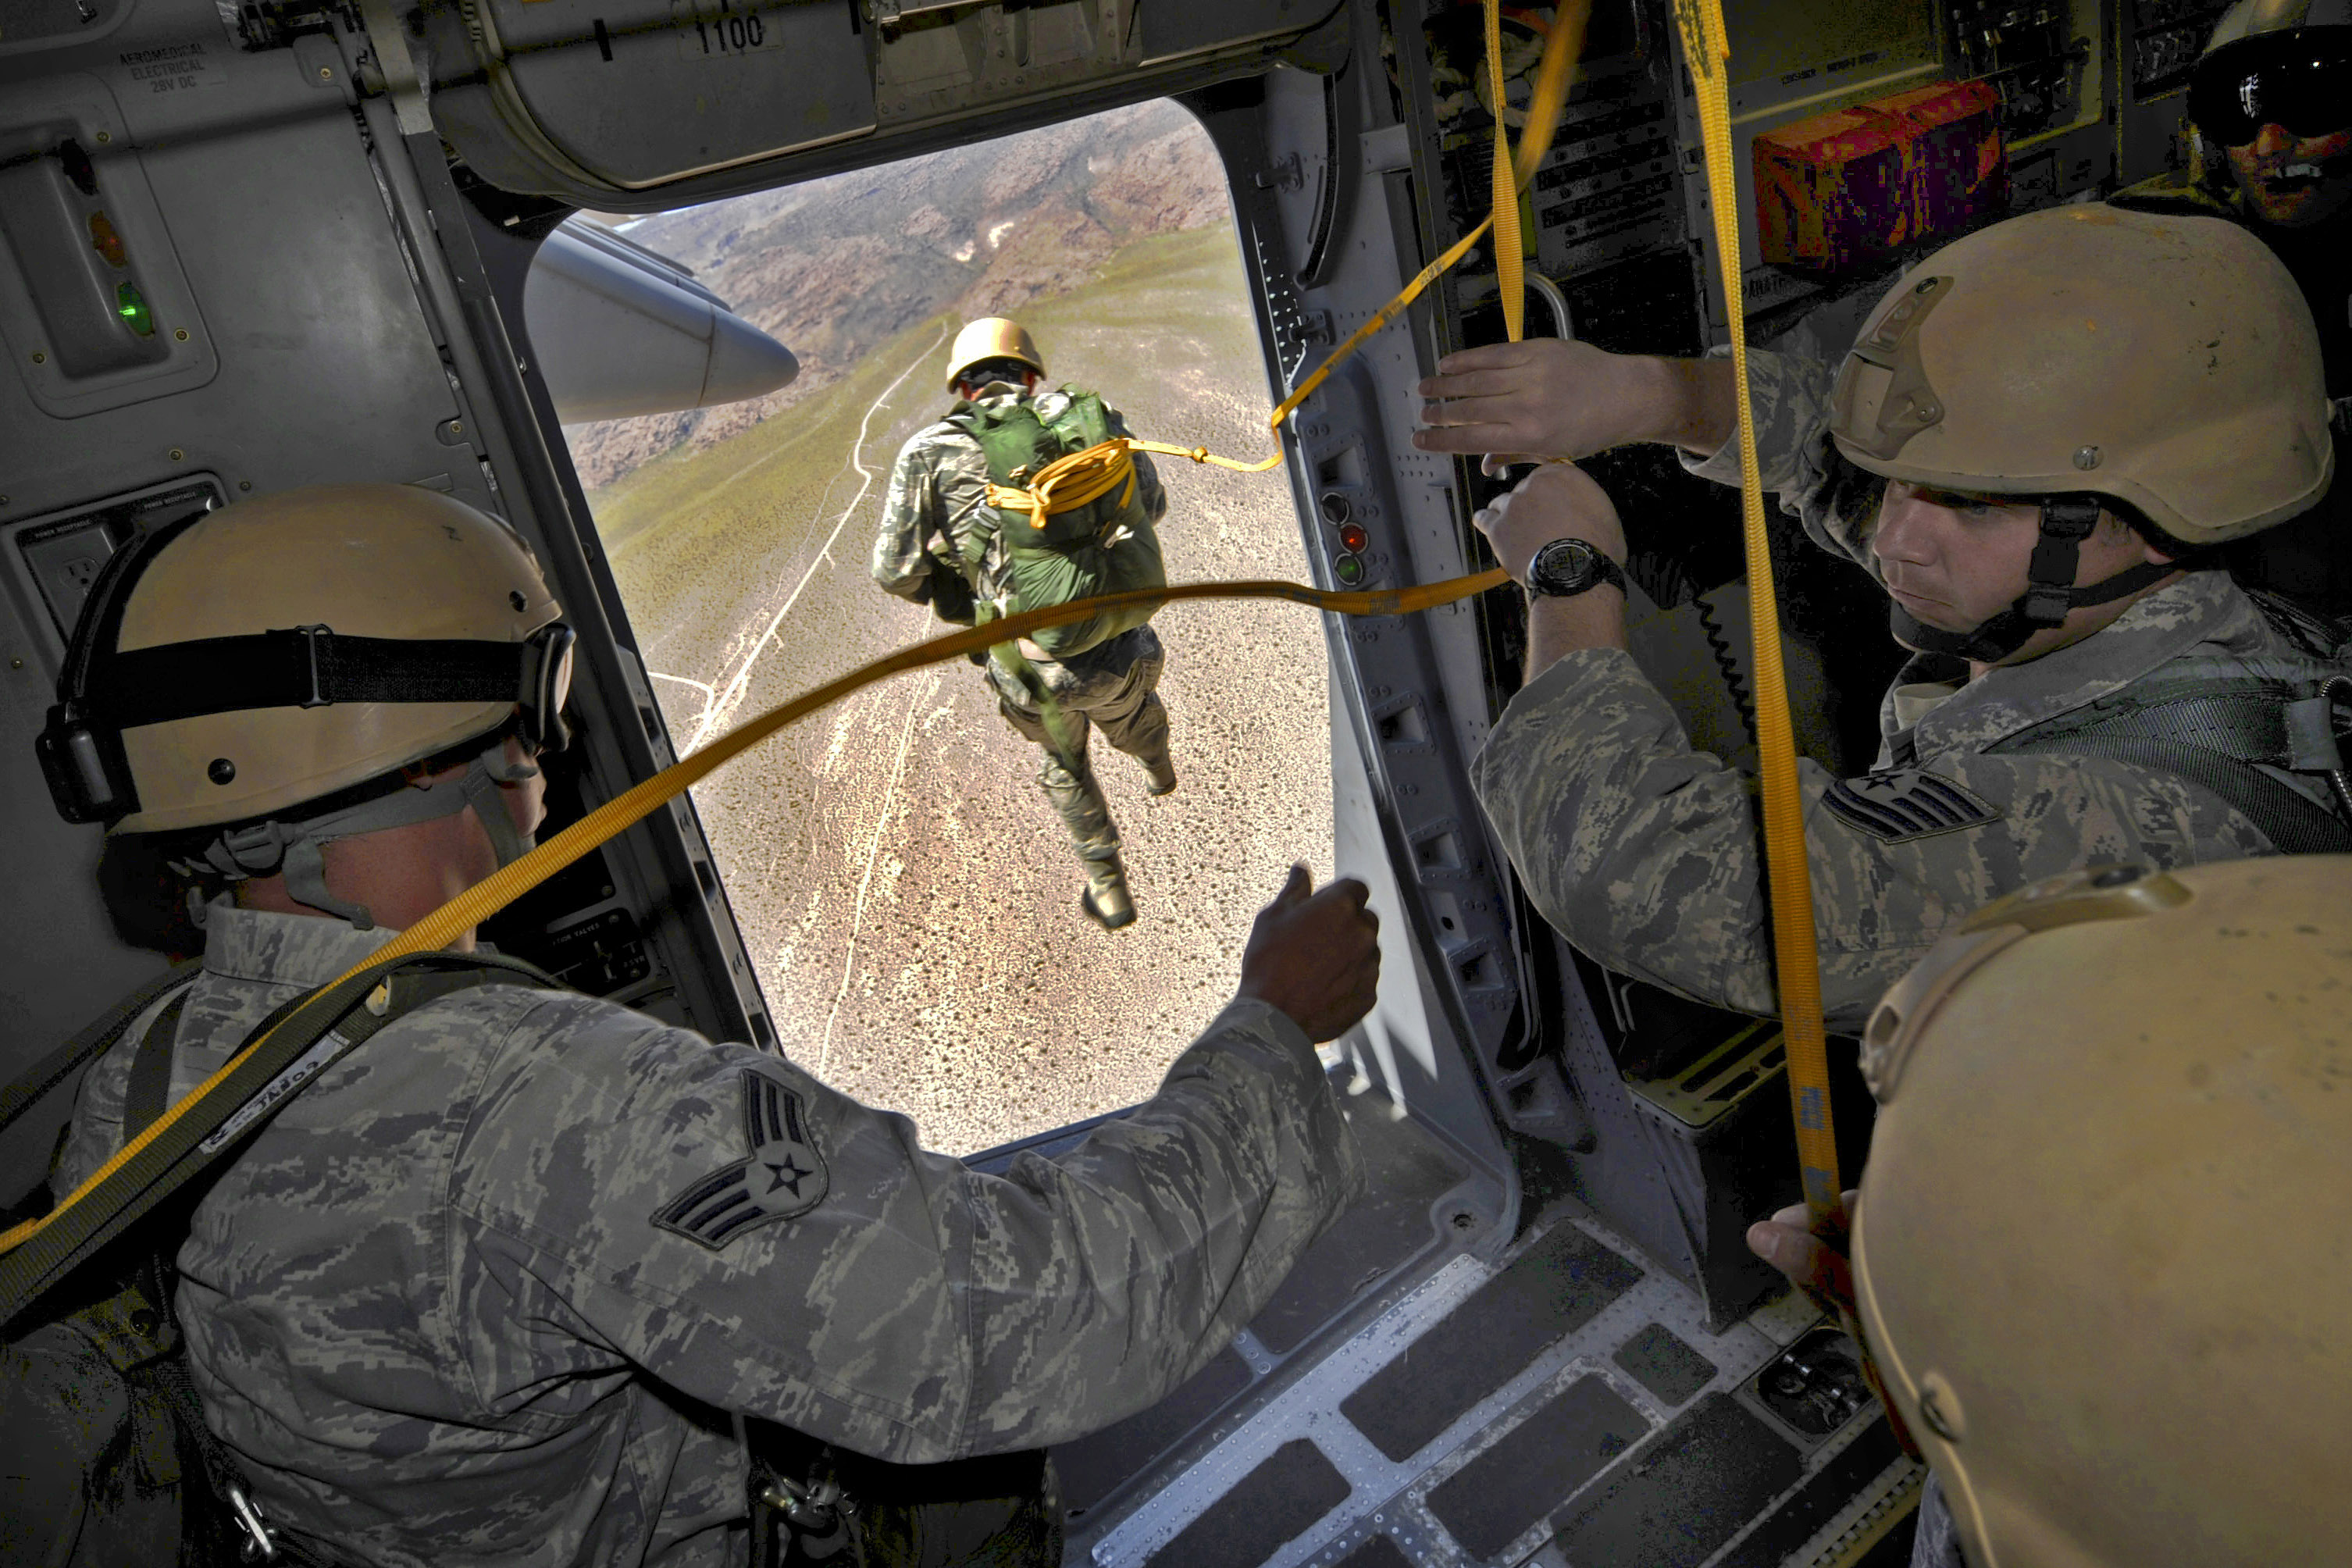 Defense.gov_News_Photo_110512-F-DP668-499_-_U.S._Air_Force_airmen_jump_from_a_C-17_Globemaster_III_aircraft_during_a_certification_course_for_drop_zone_control_officers_in_Alamo_Nev._on_May.jpg